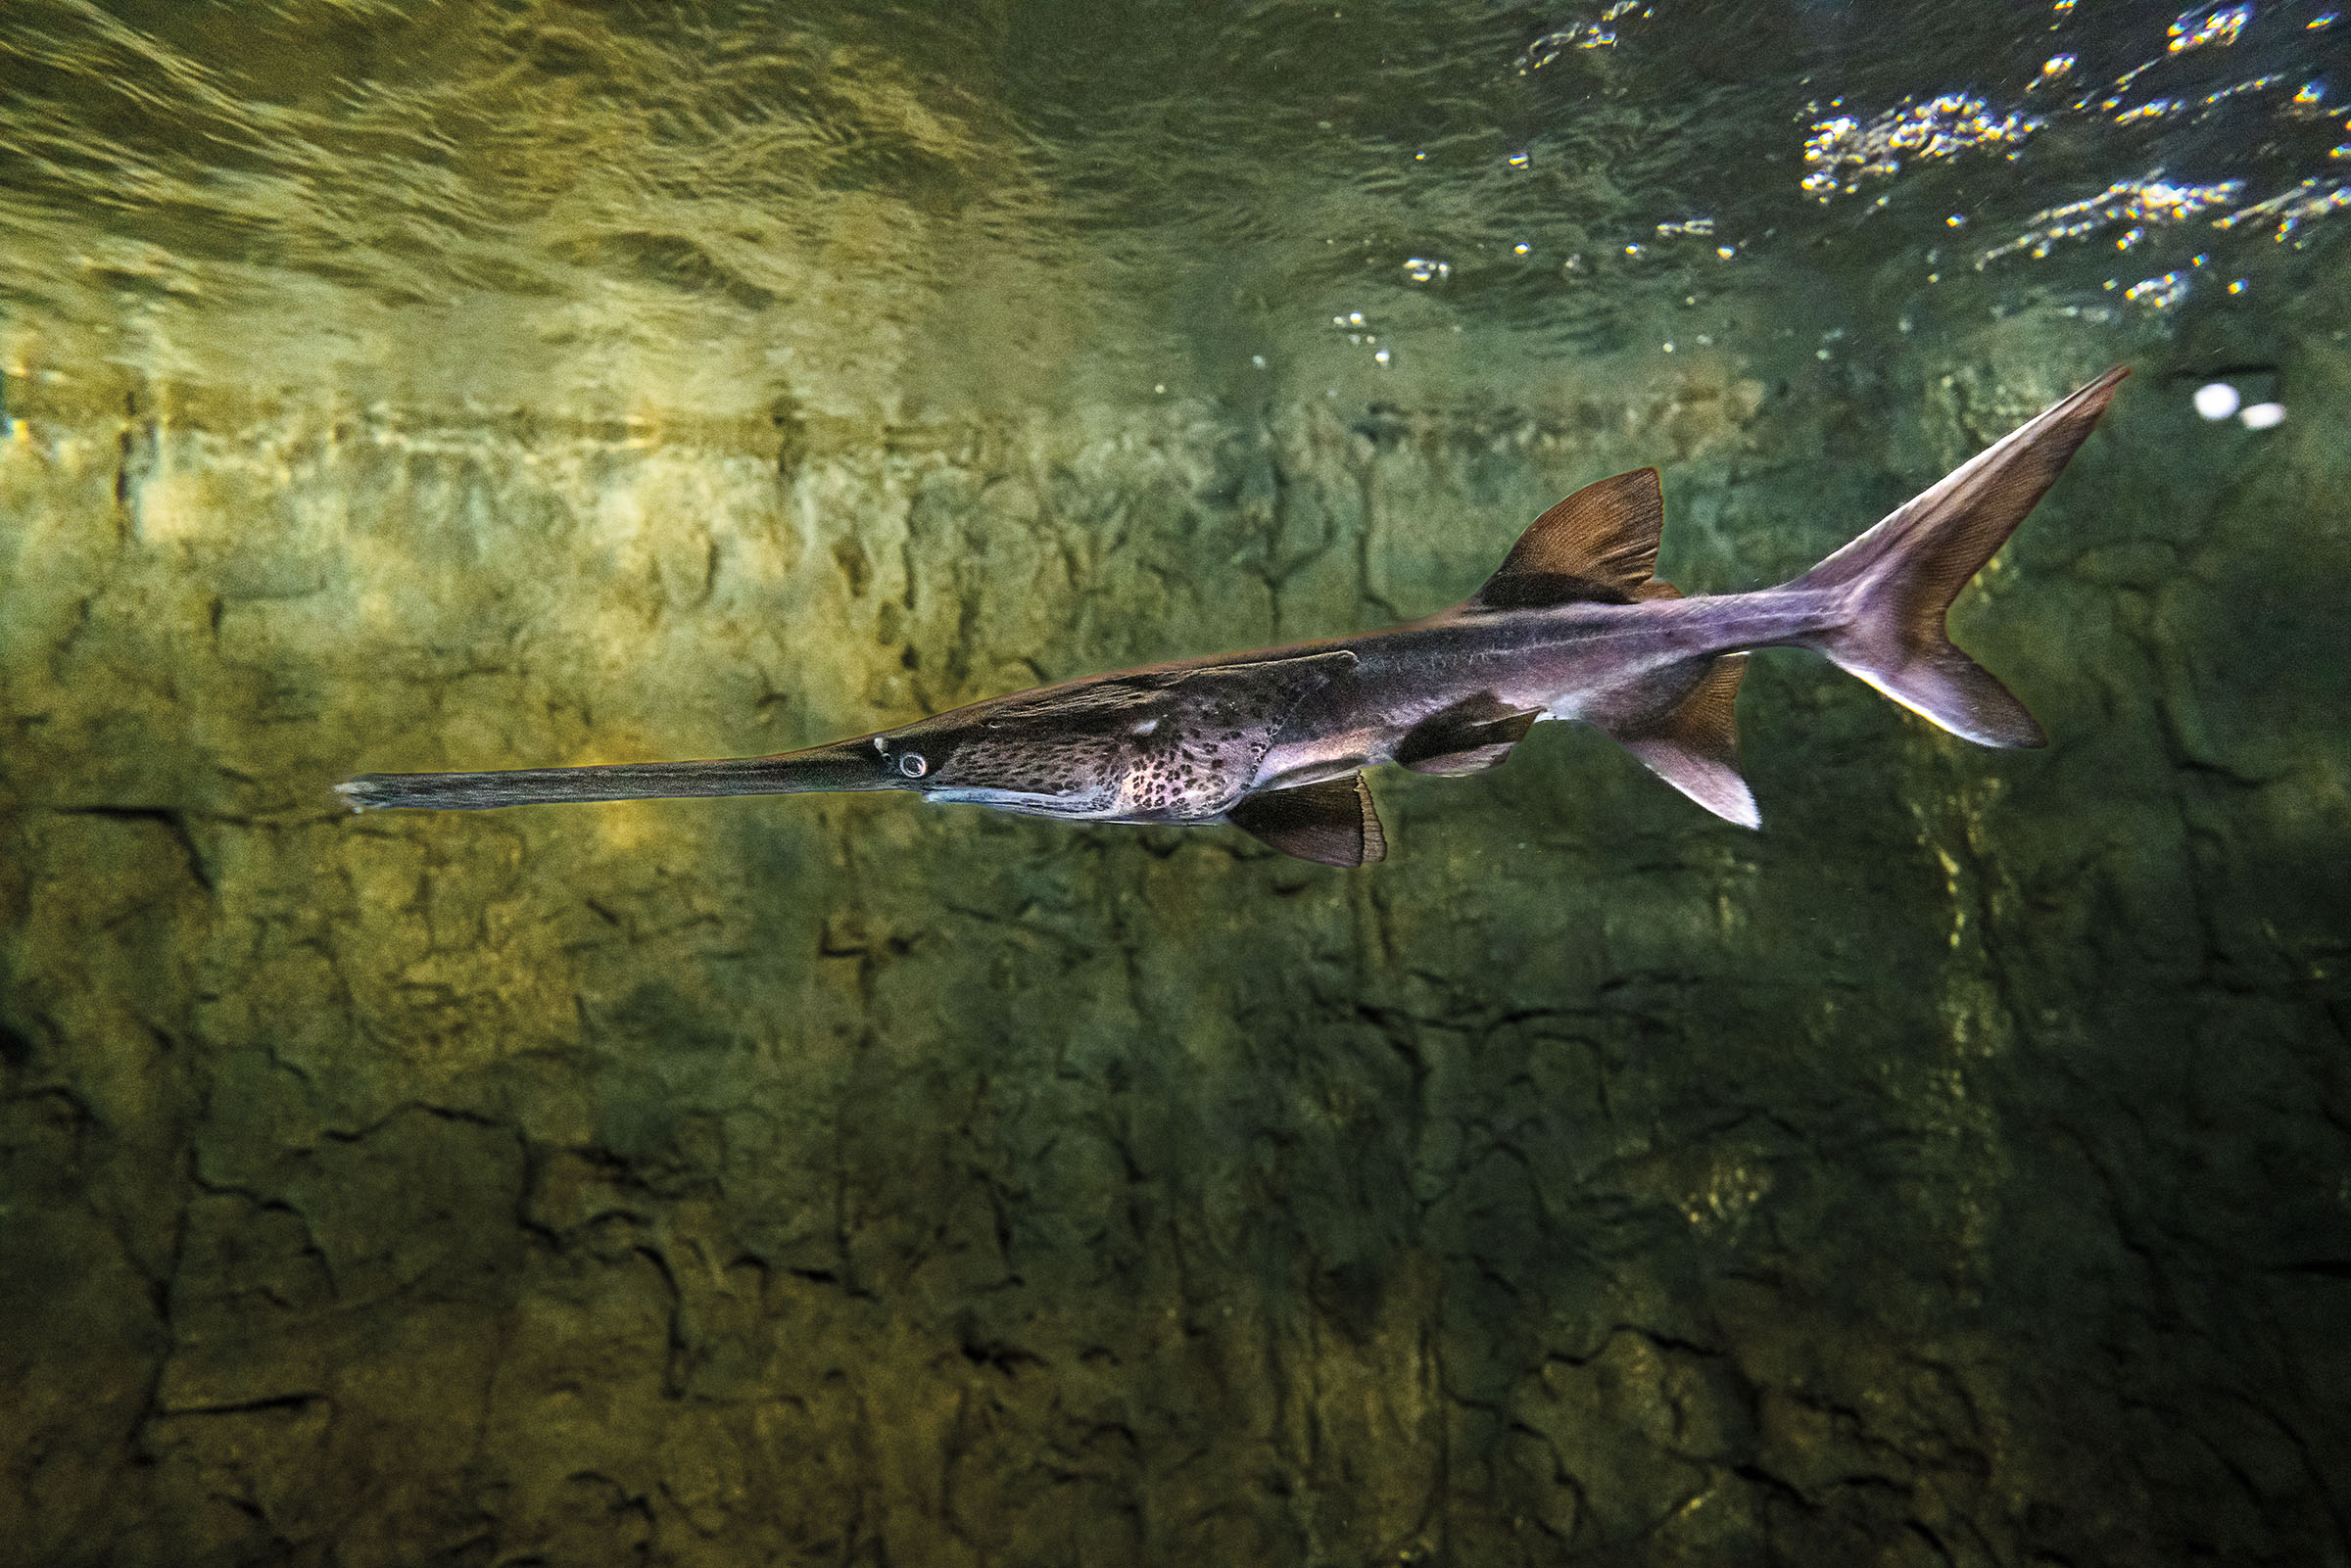 A side profile image of a paddlefish, displaying its gray color and long nose